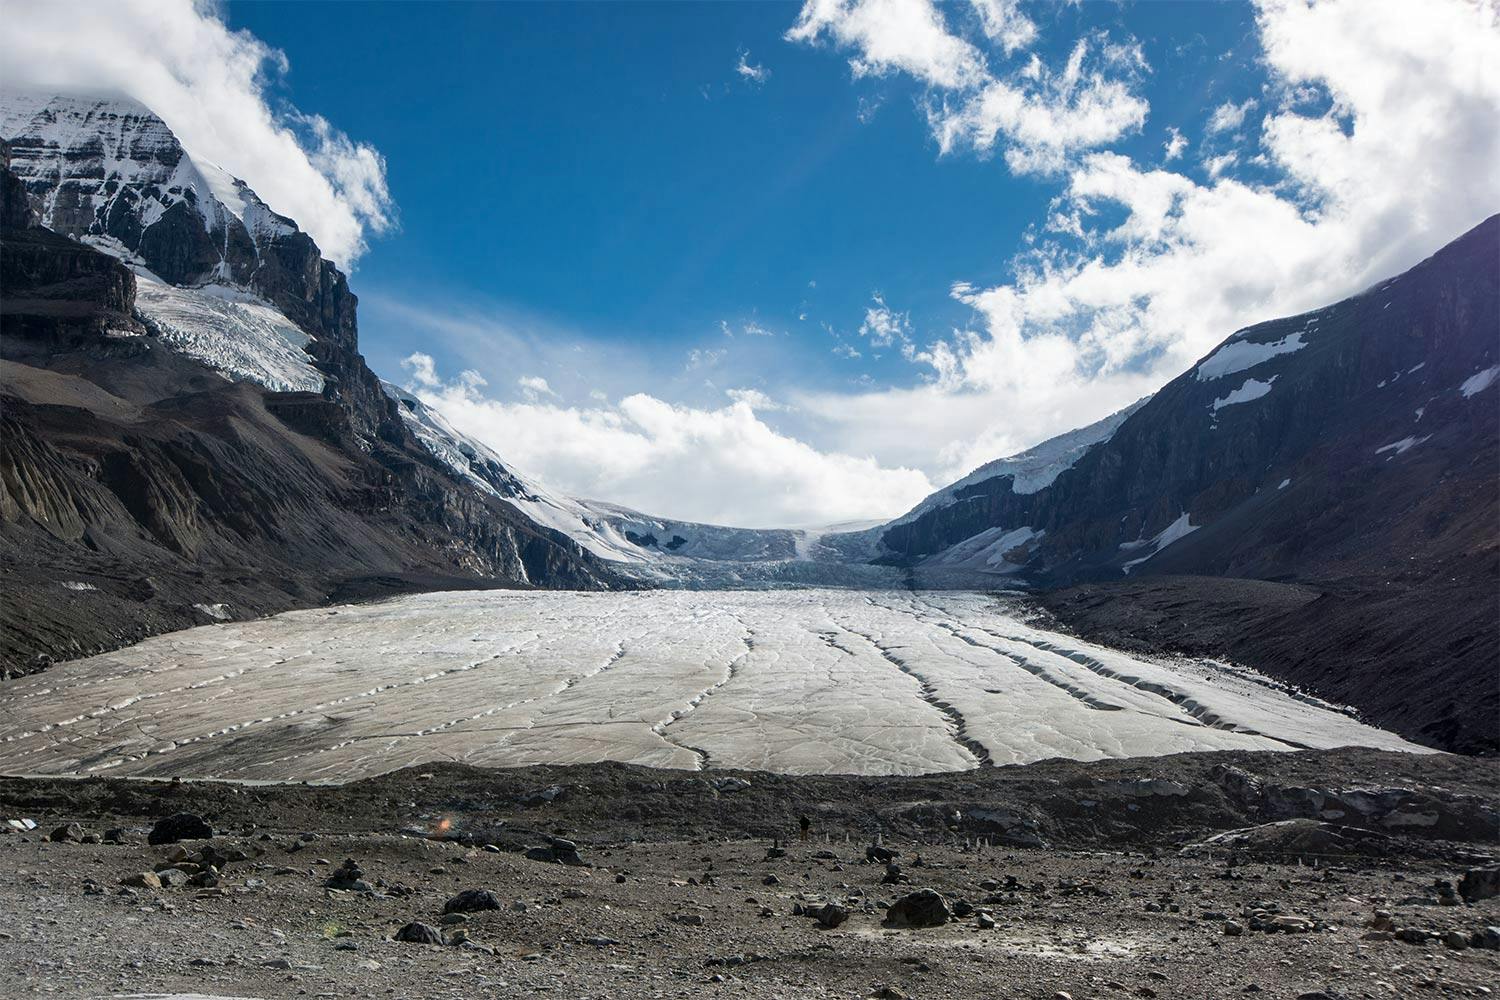 Under a blue sky, glacial ice extends into the distance between two immense mountains in Alberta's Athabasca Glacier.